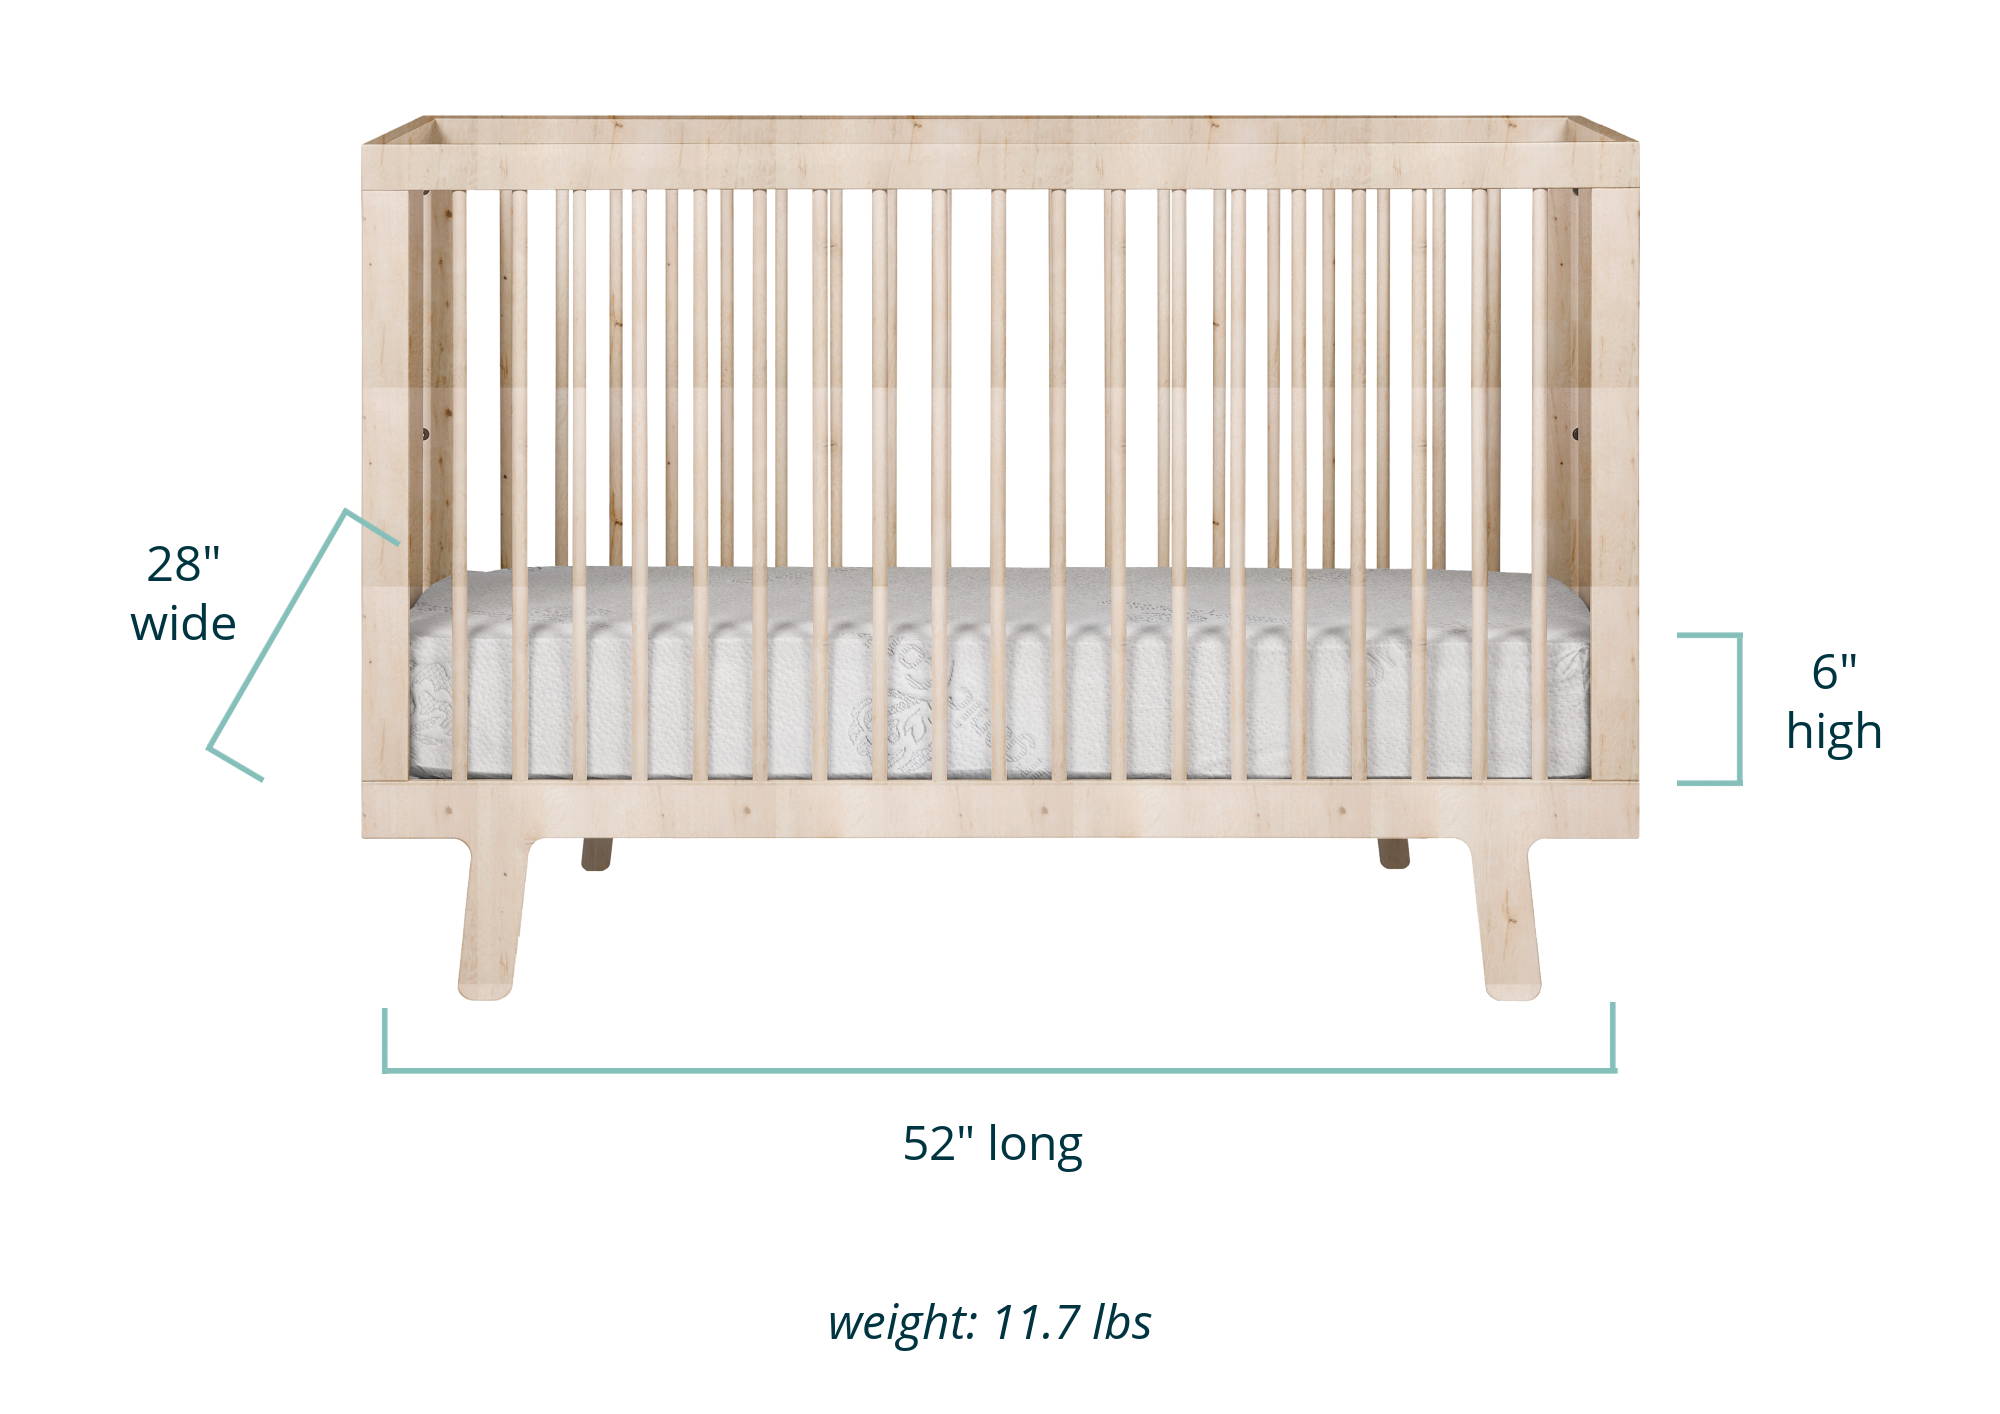 Luxe crib mattress in a crib showing dimensions of 28